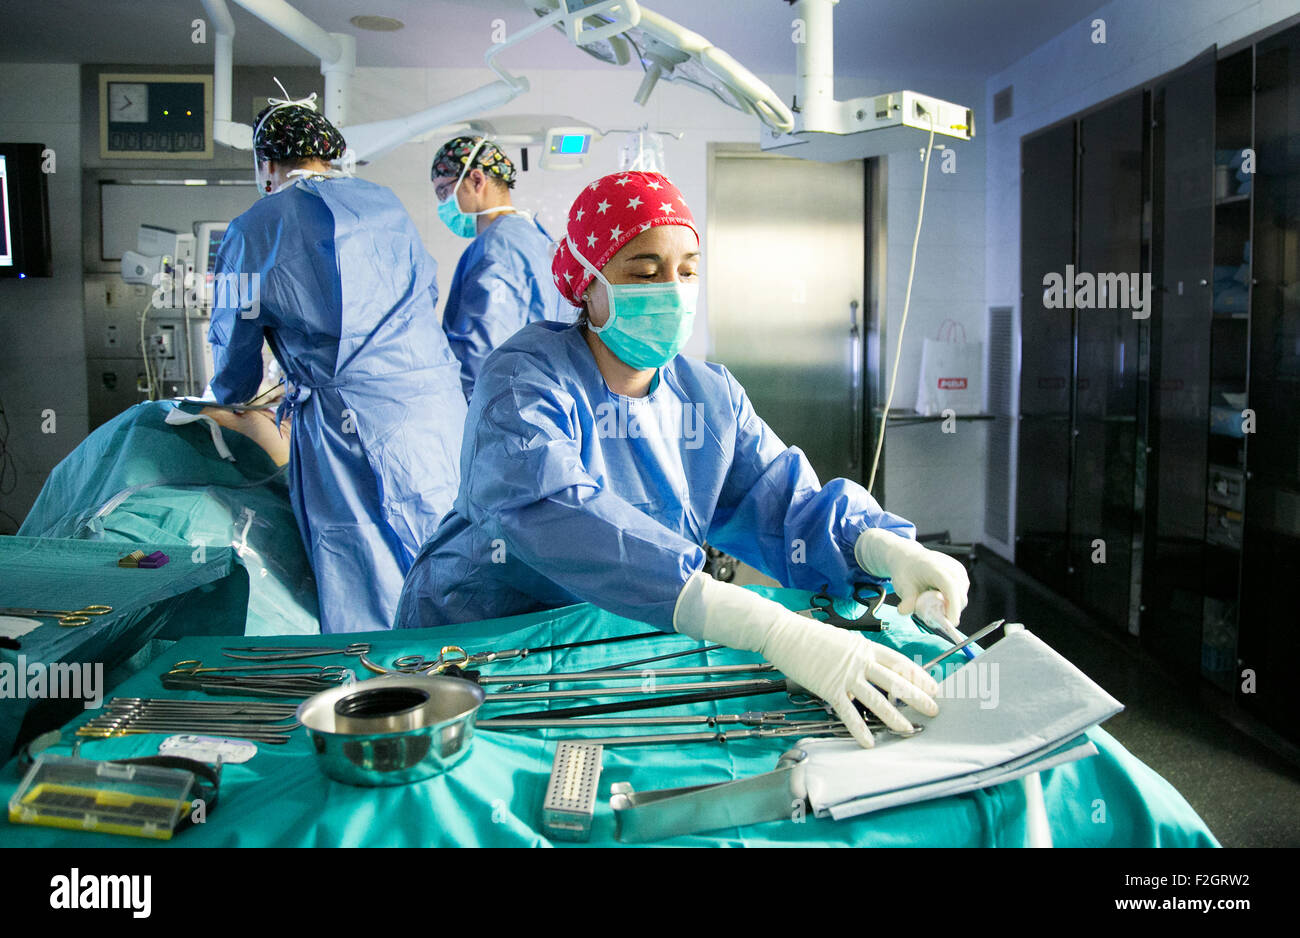 Laparoscopic surgery, also called minimally invasive surgery MIS in a hospital in Spain. Stock Photo